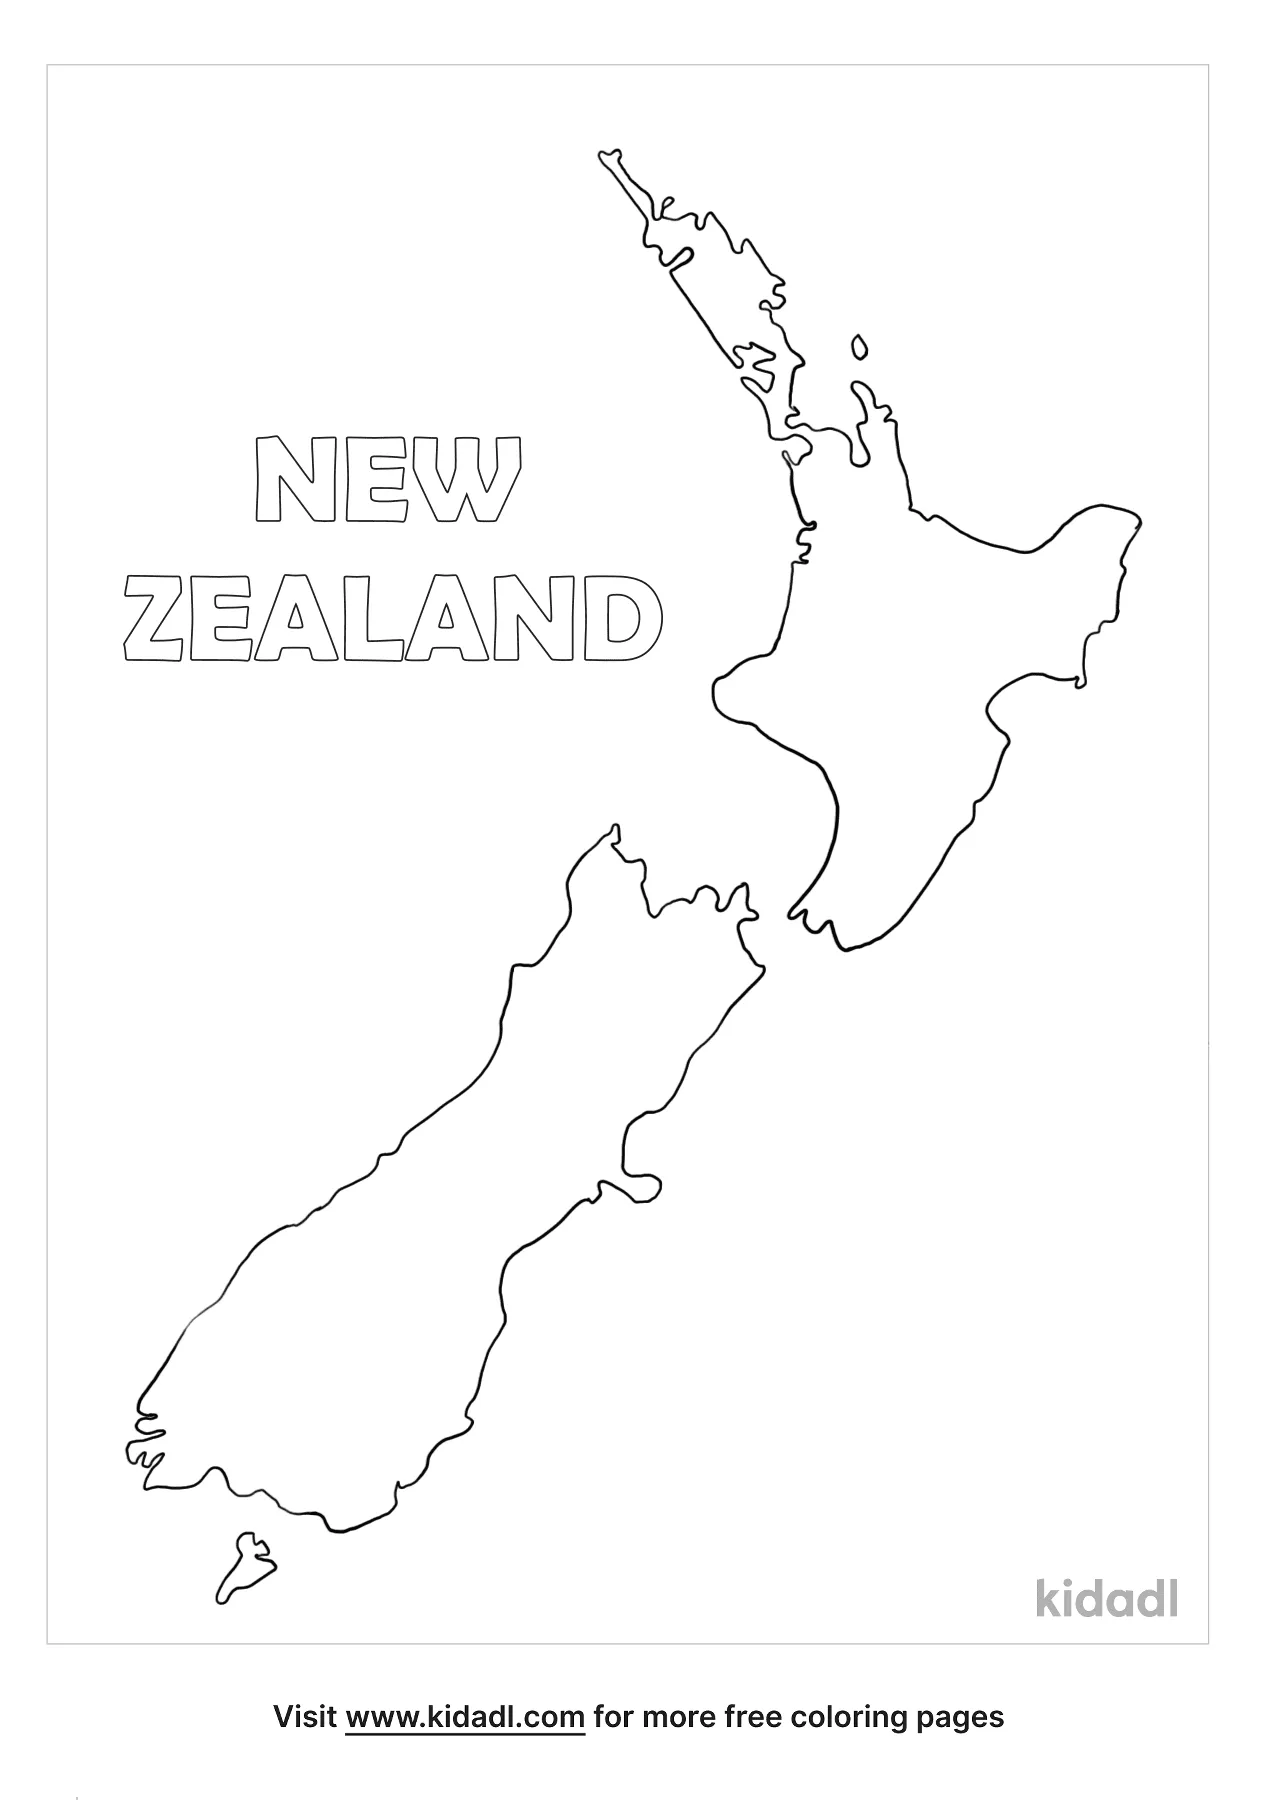 Free new zealand map coloring page coloring page printables